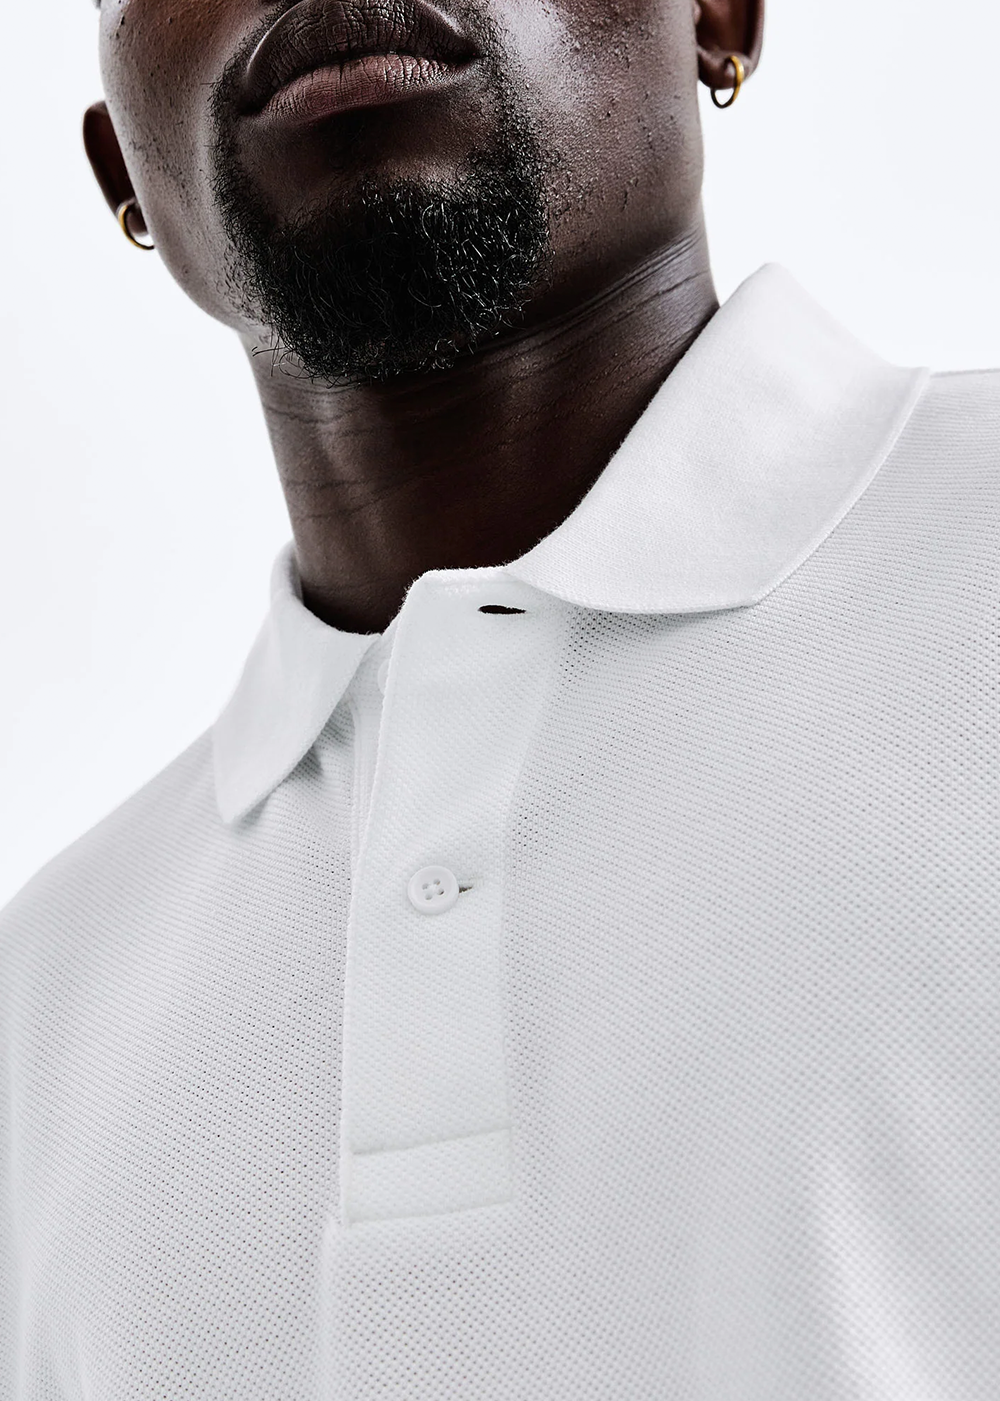 Athletic Pique Polo - White - Reigning Champ Canada - Danali - RC-1471